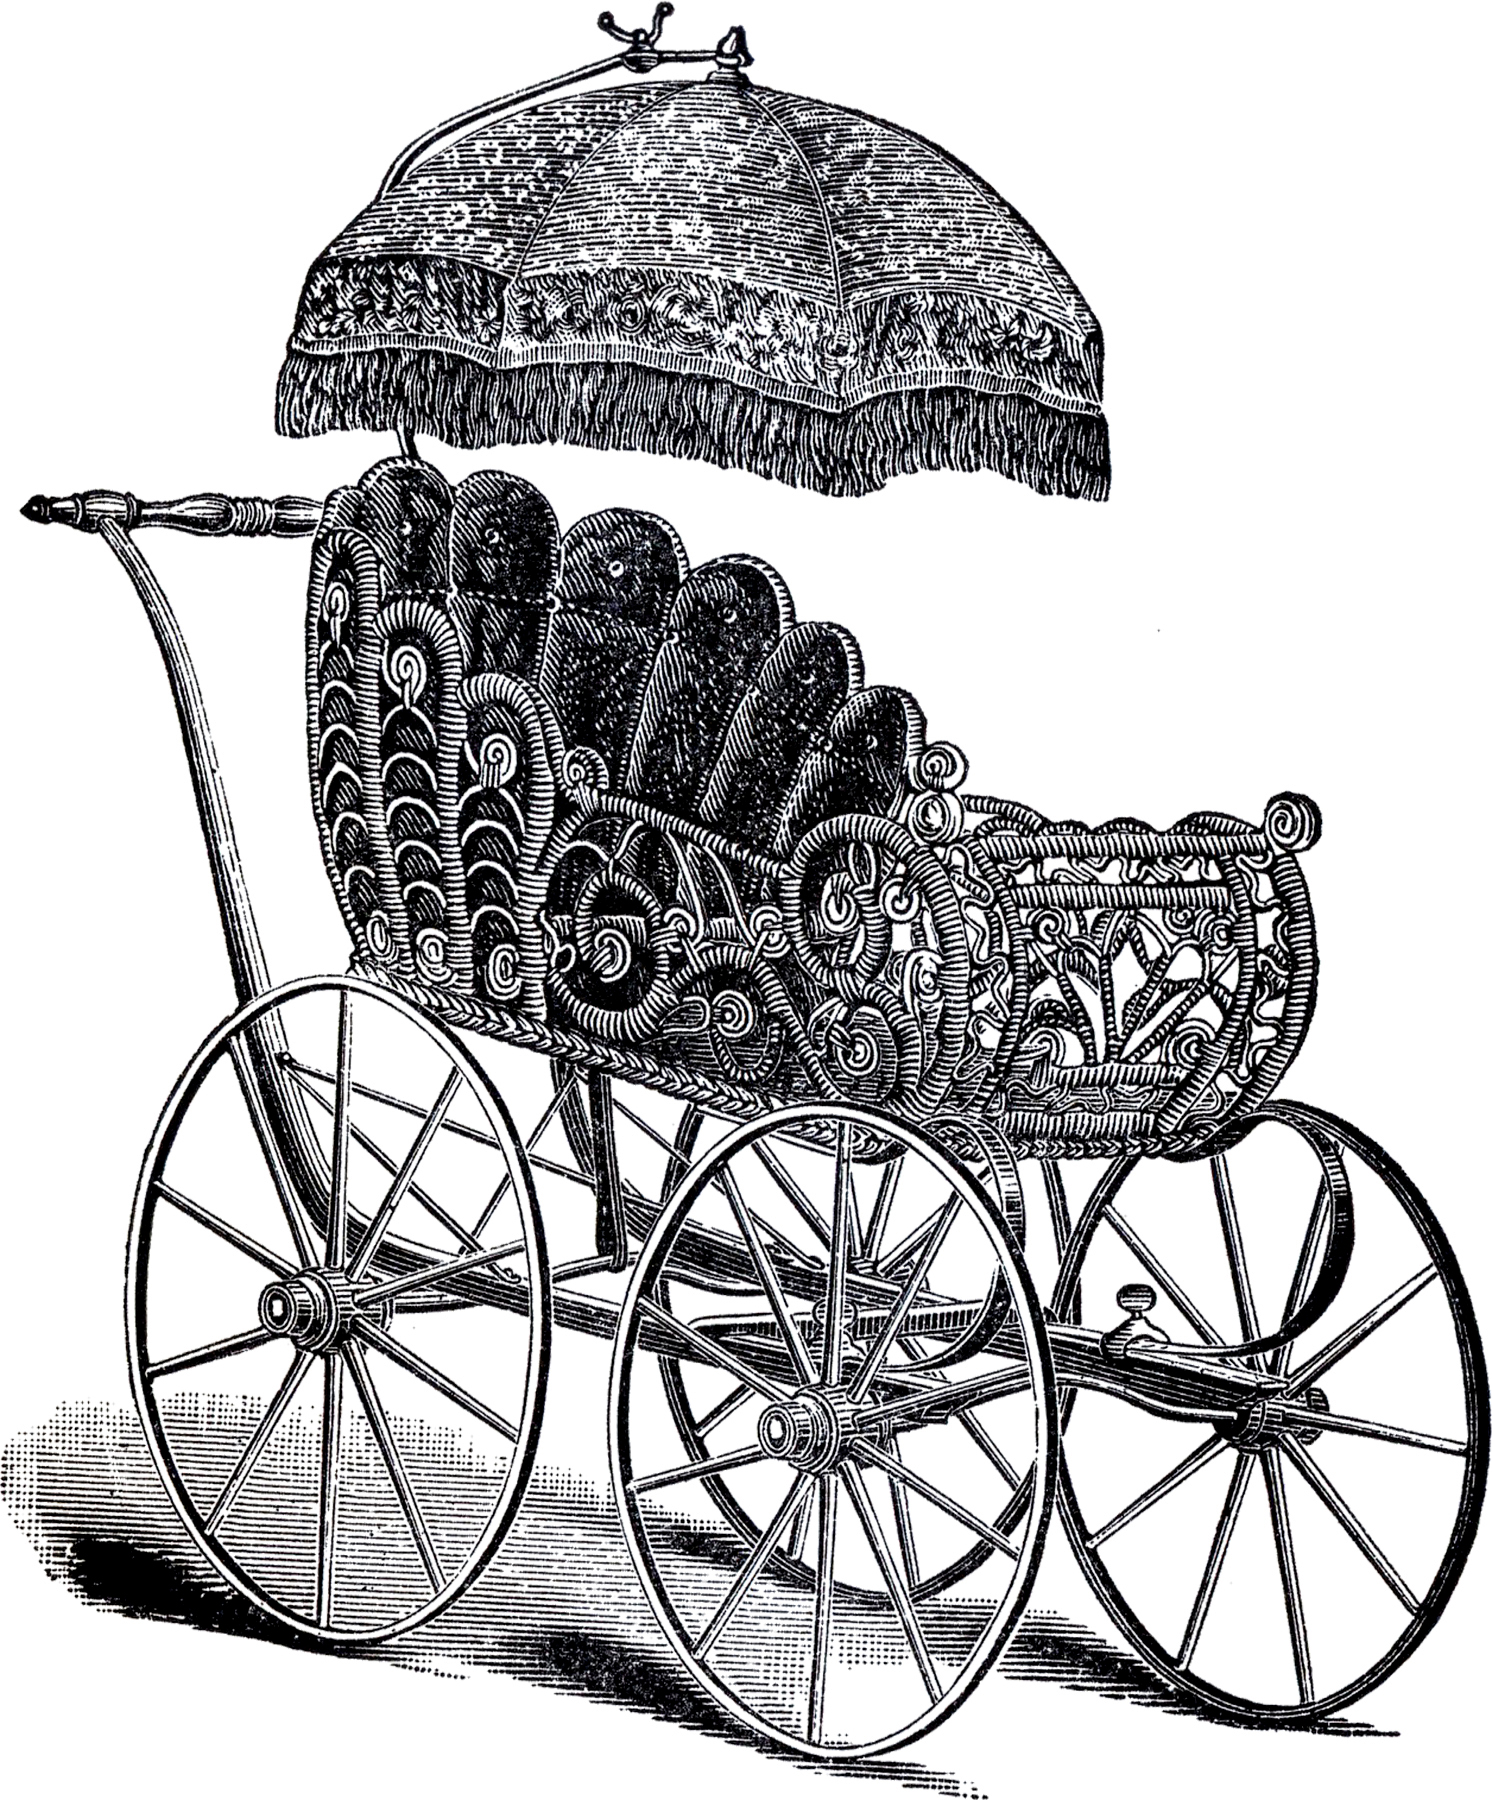 antique baby carriage wicker